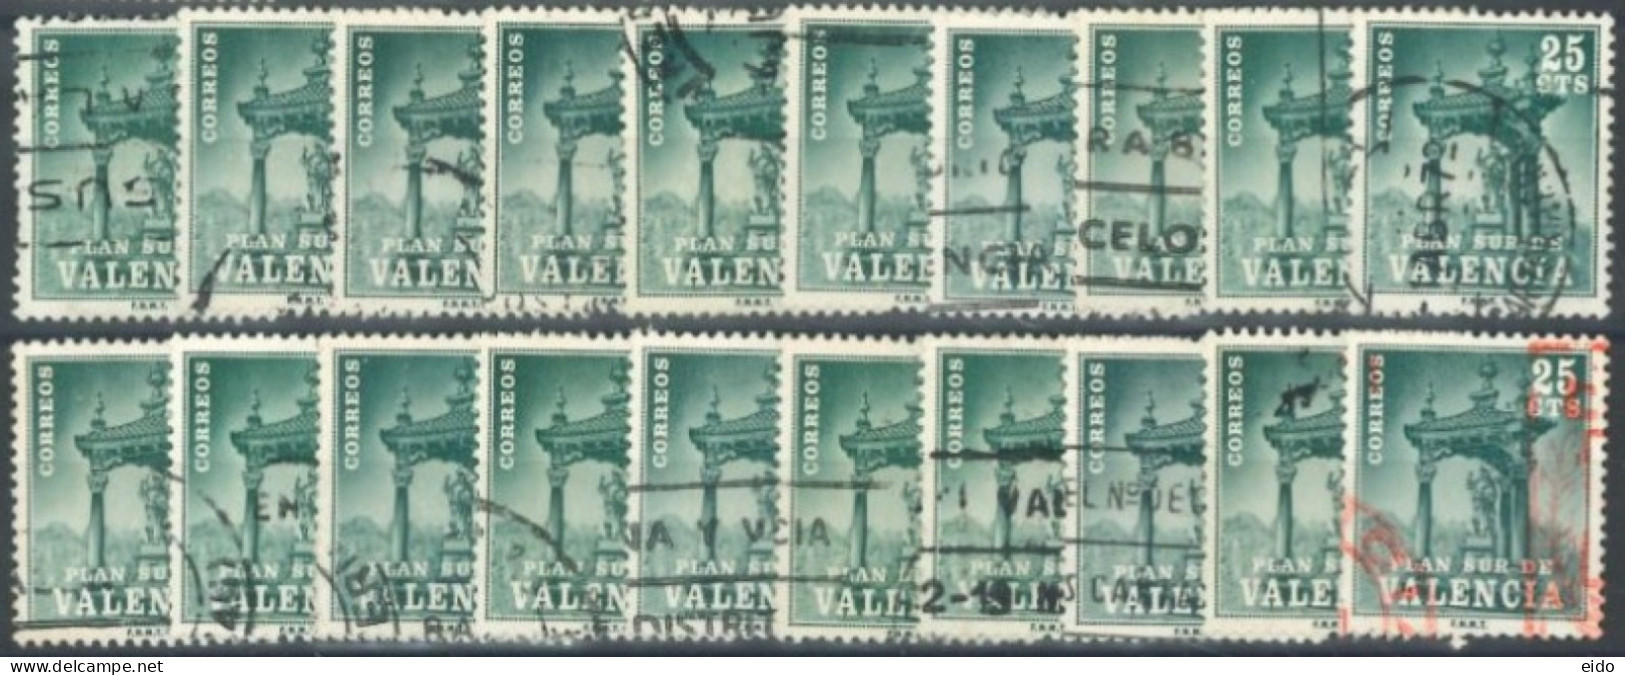 SPAIN, VALENCIA STAMP QTY. 20 DISCOUNTED (SPECIAL PRICE), USED. - Gebraucht